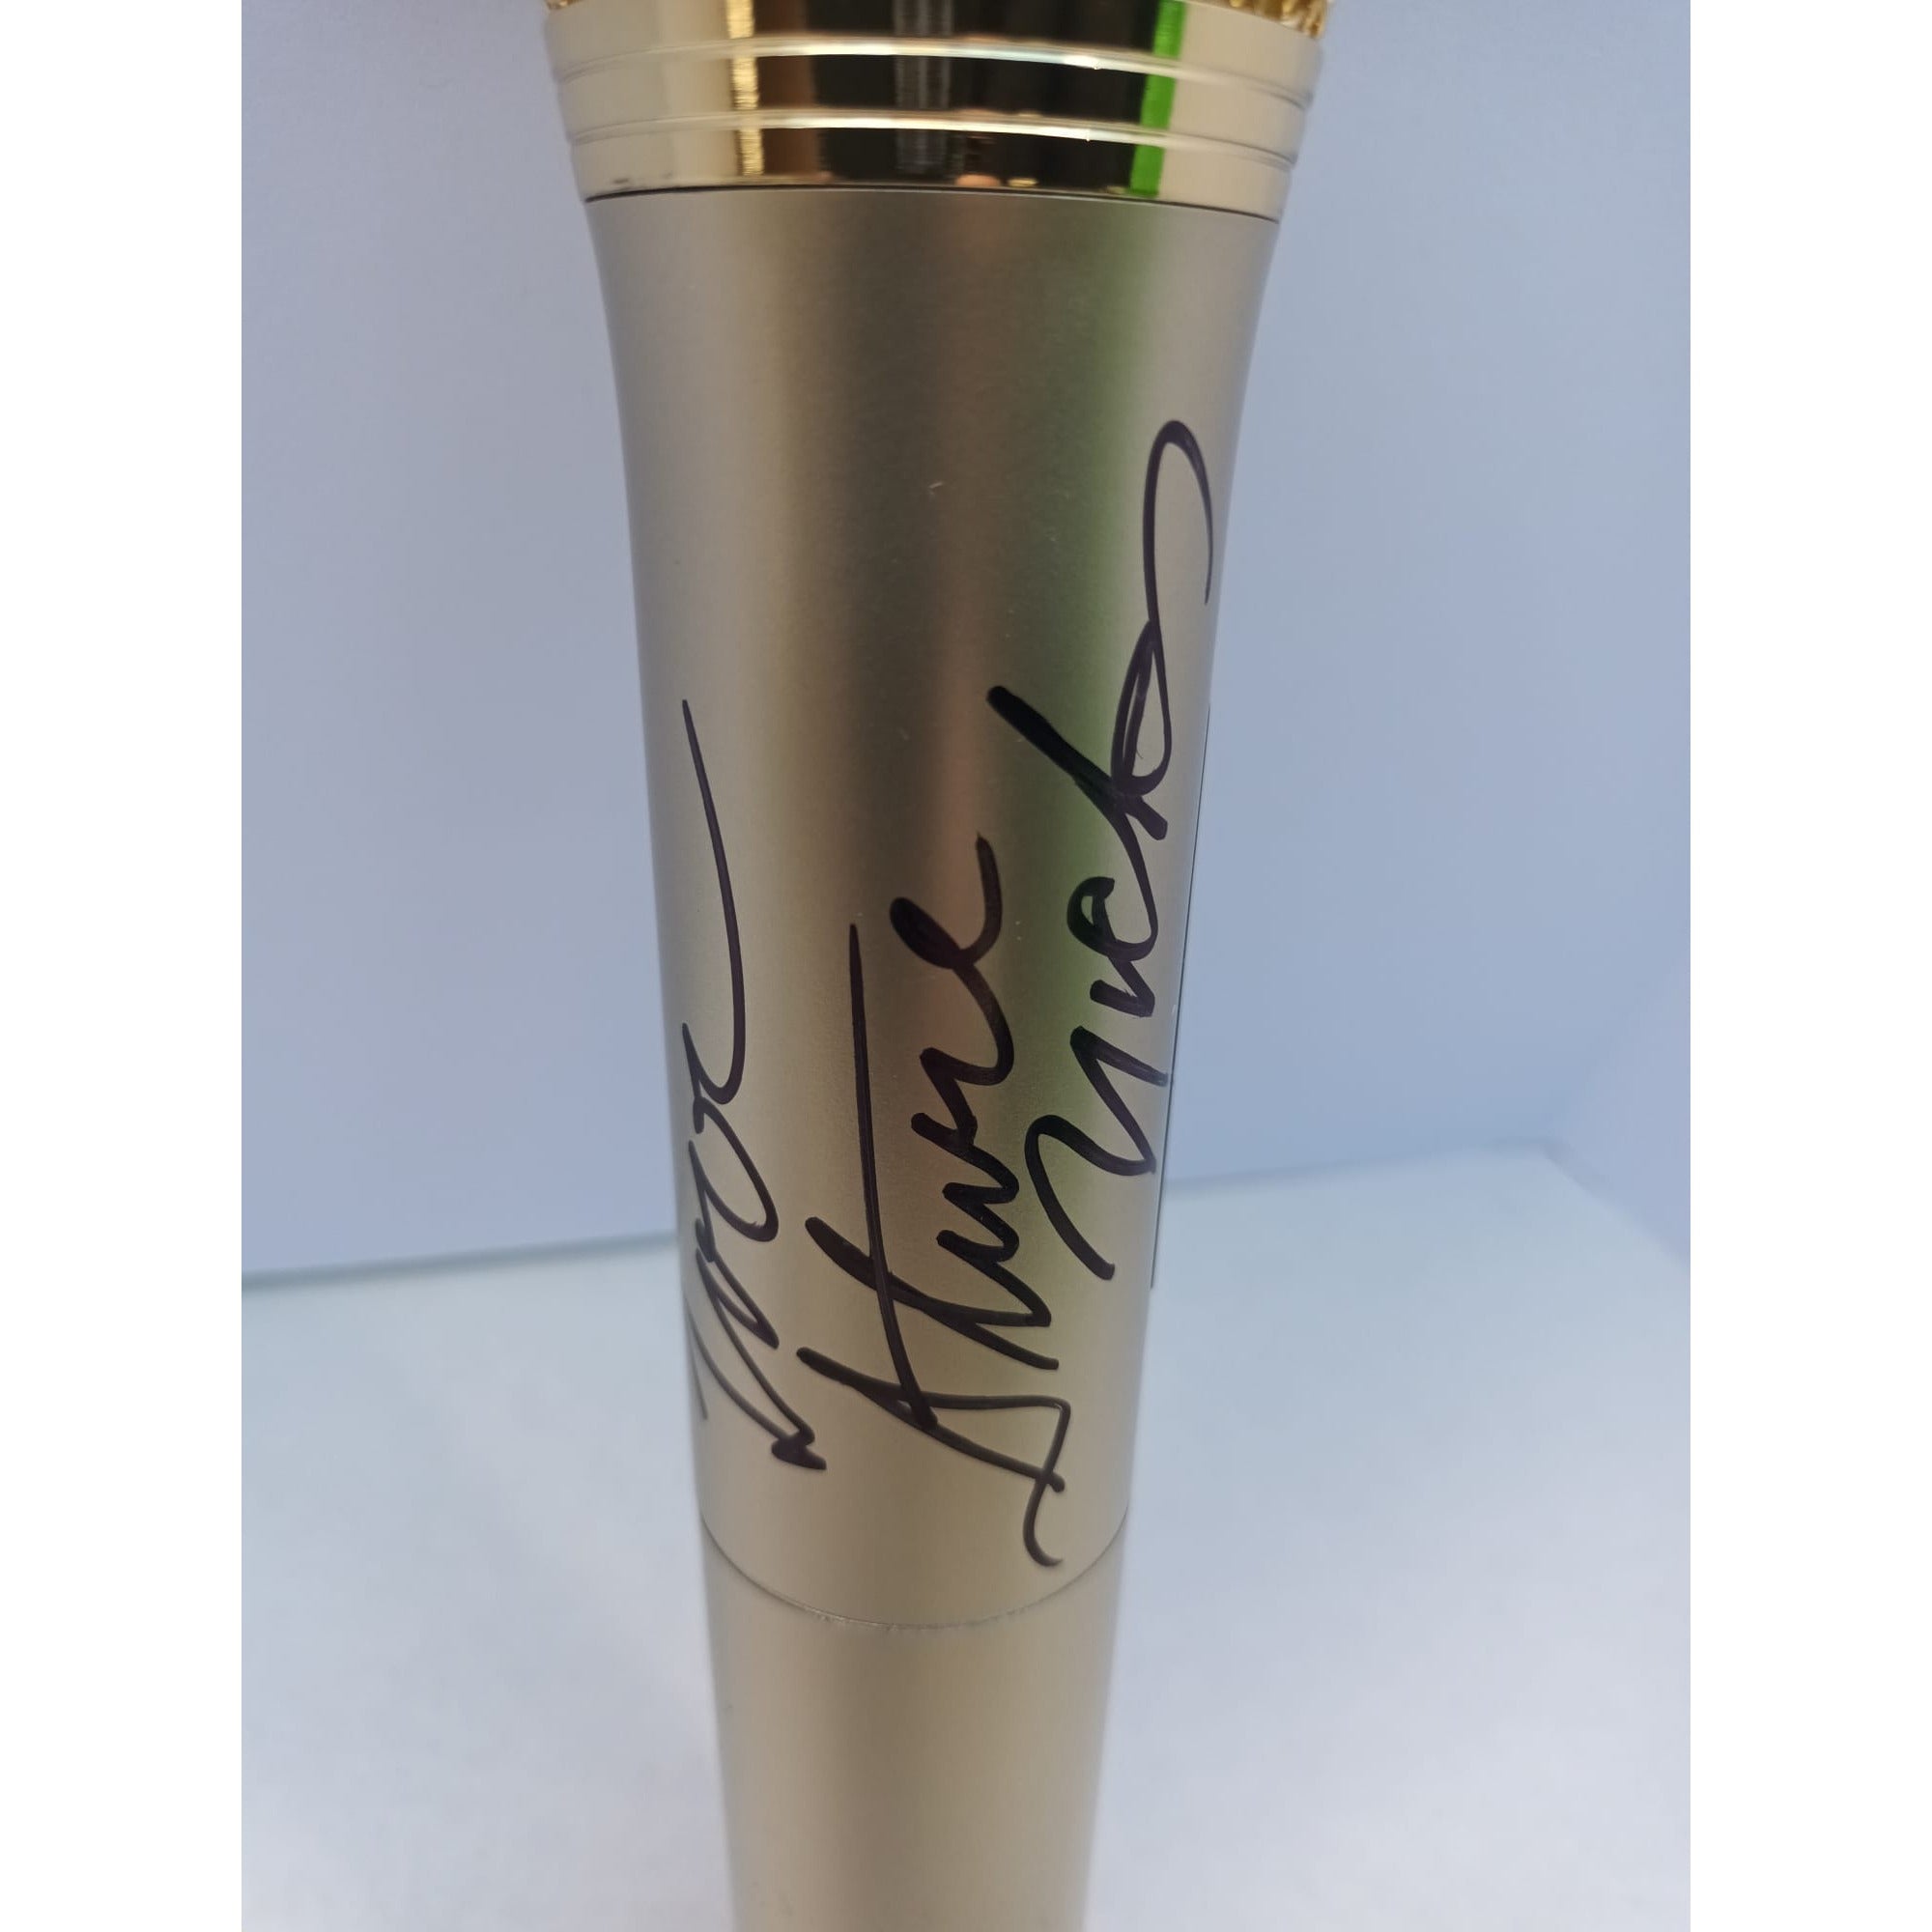 Stevie Nicks microphone signed with proof